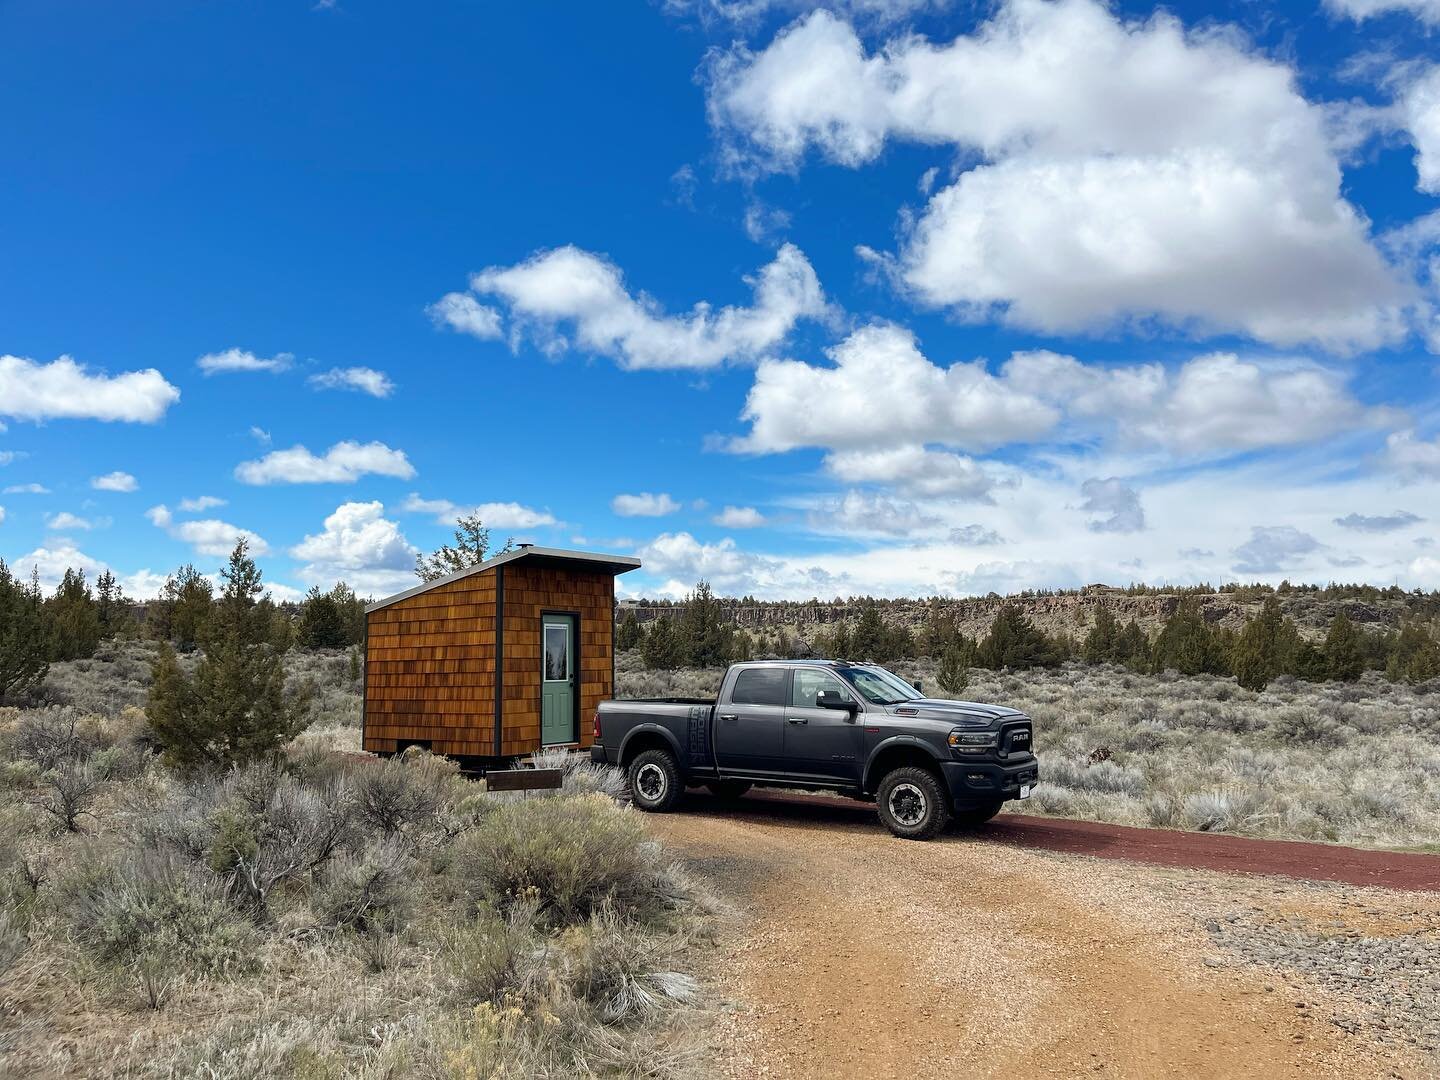 I love dropping off this mobile sauna especially when it&rsquo;s being used properly for a wellness retreat!
&bull;
This is some absolutely beautiful country and we are so grateful to be out here amongst the crooked river and juniper trees.